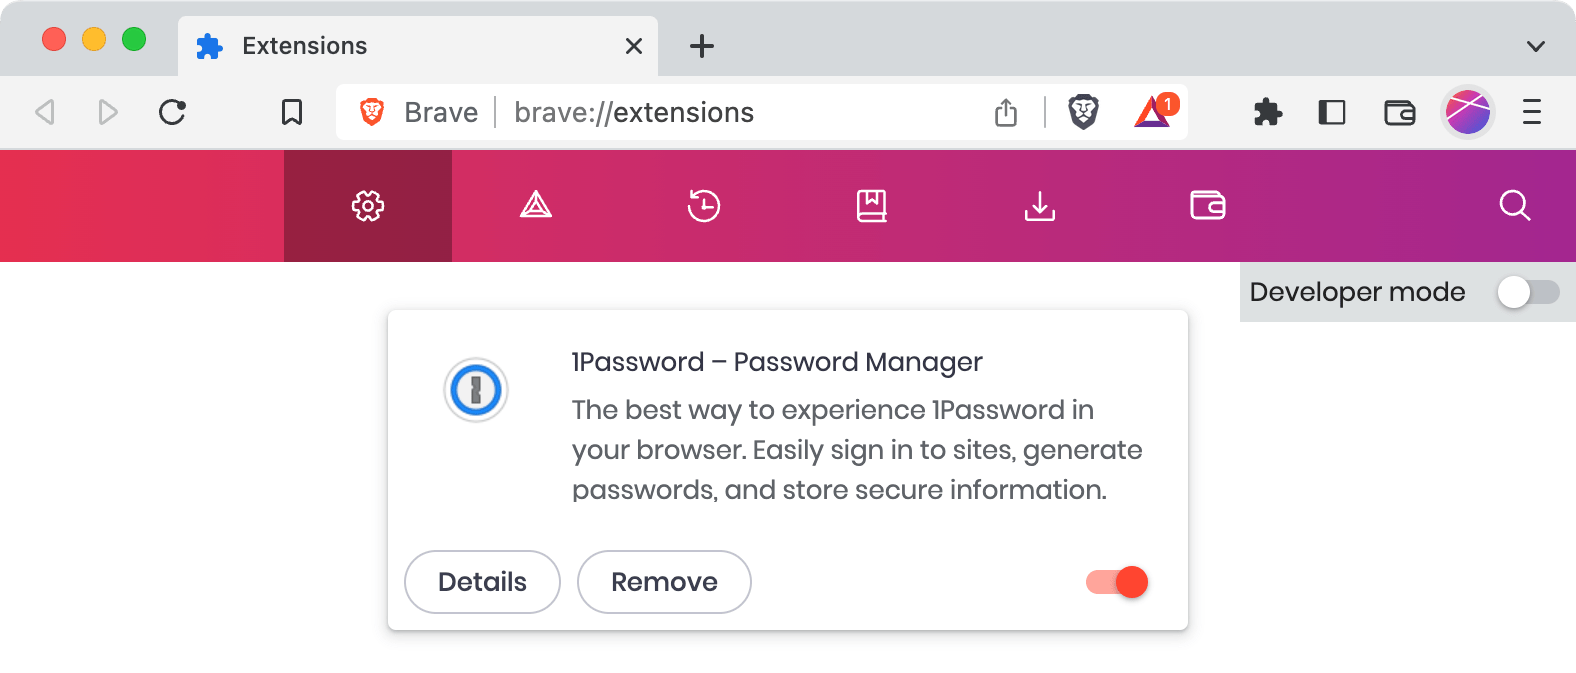 1Password in the Brave Extensions page